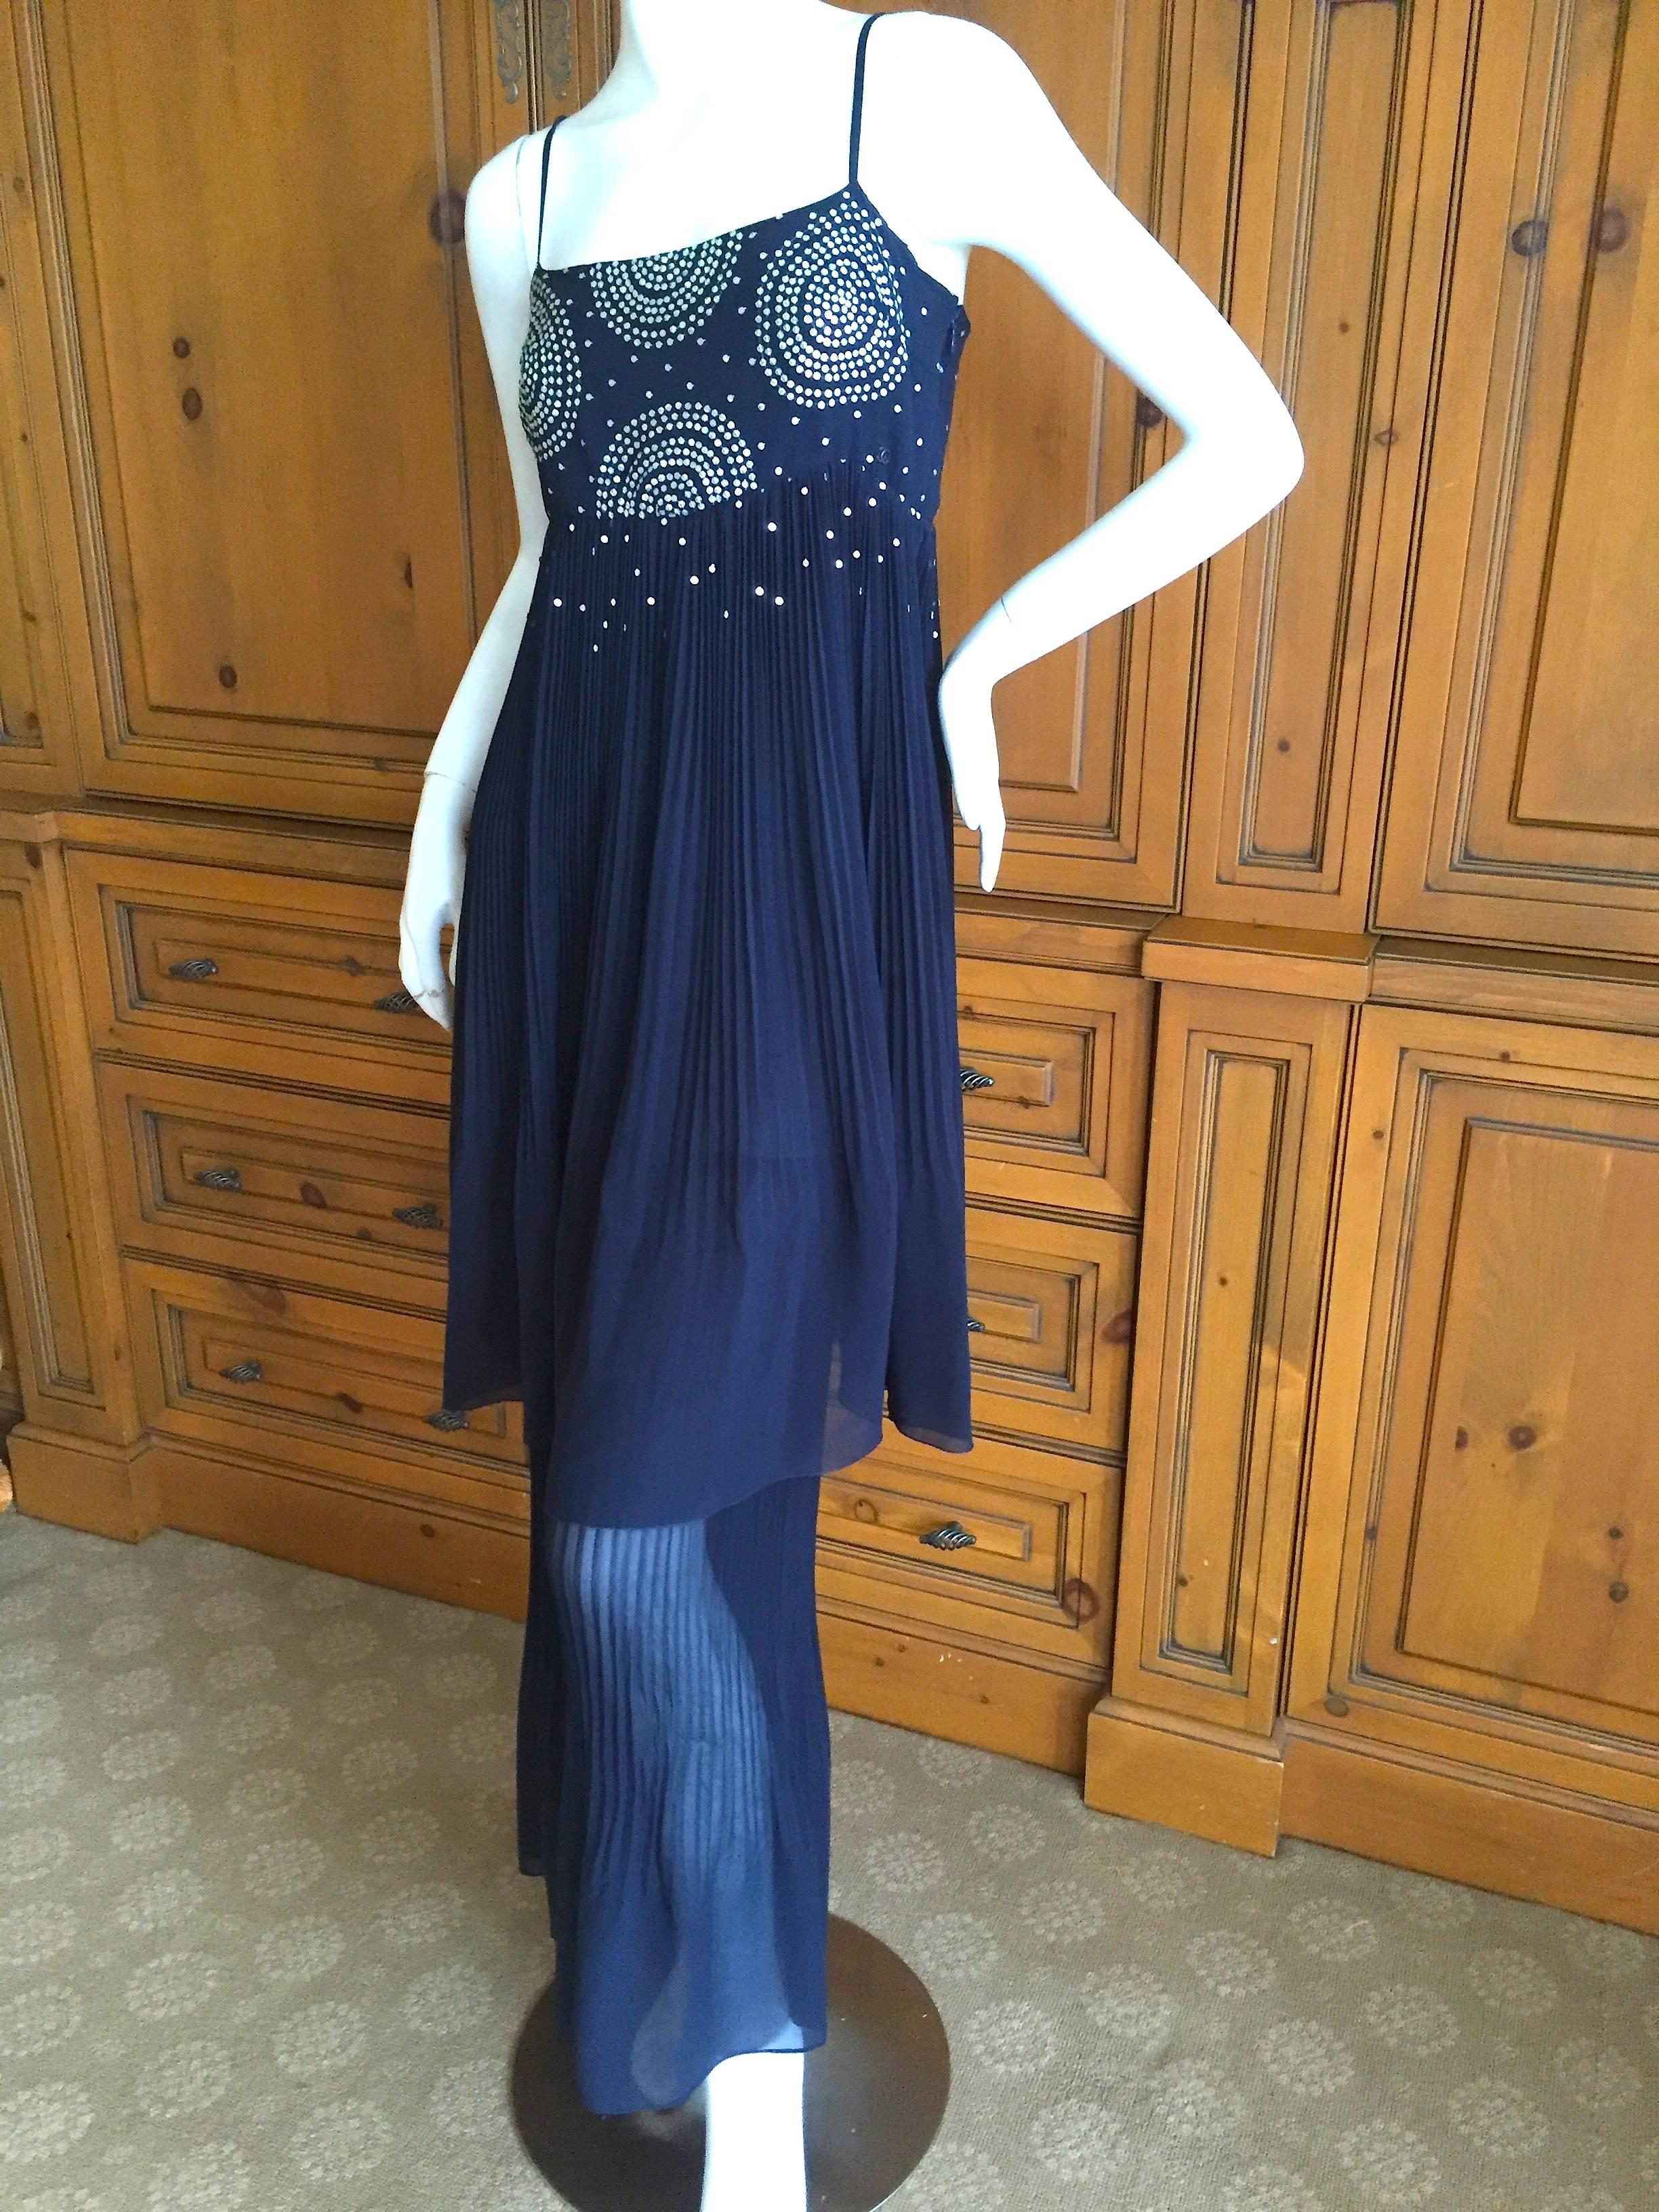 Wonderful navy blue dress from Chanel.
This has attached pleated palazzo pant's, but I styled it showing them removed, to give you an idea of options.
From Fall 2000 by Karl Lagerfeld for Chanel.
Size 38
Bust 36